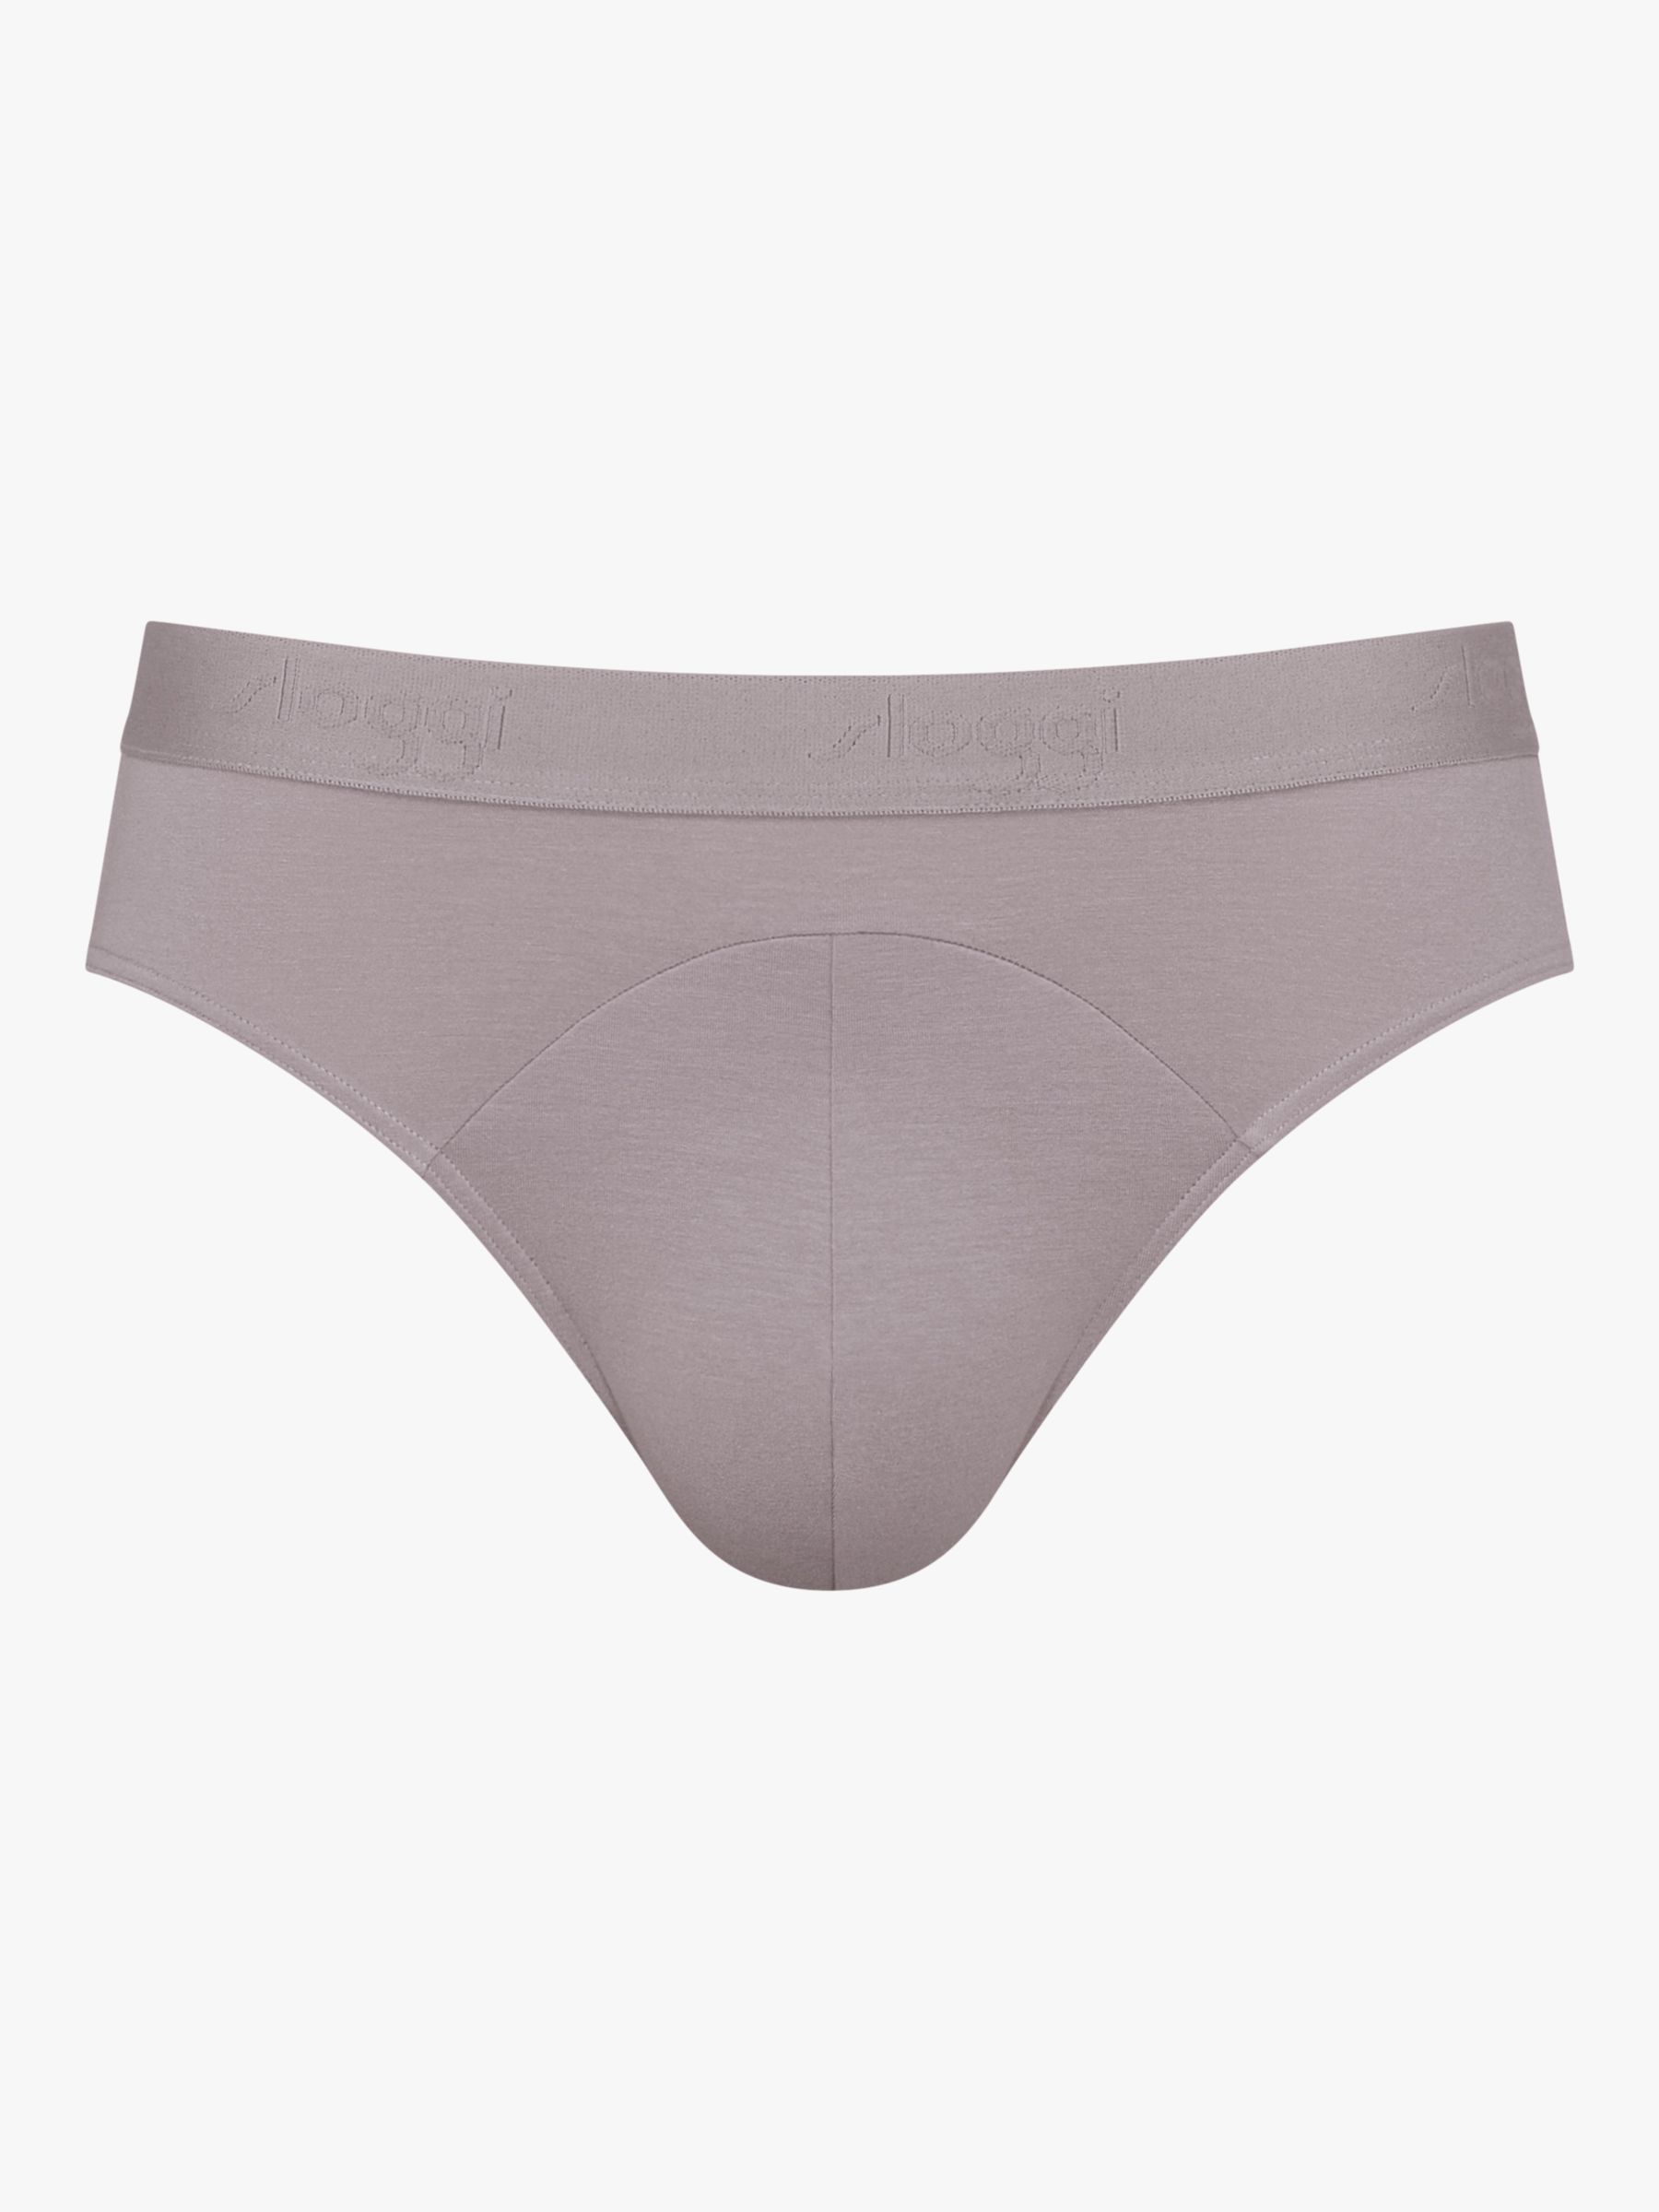 Sloggi EVER Soft Briefs, Pack of 2, Warm Stone at John Lewis & Partners